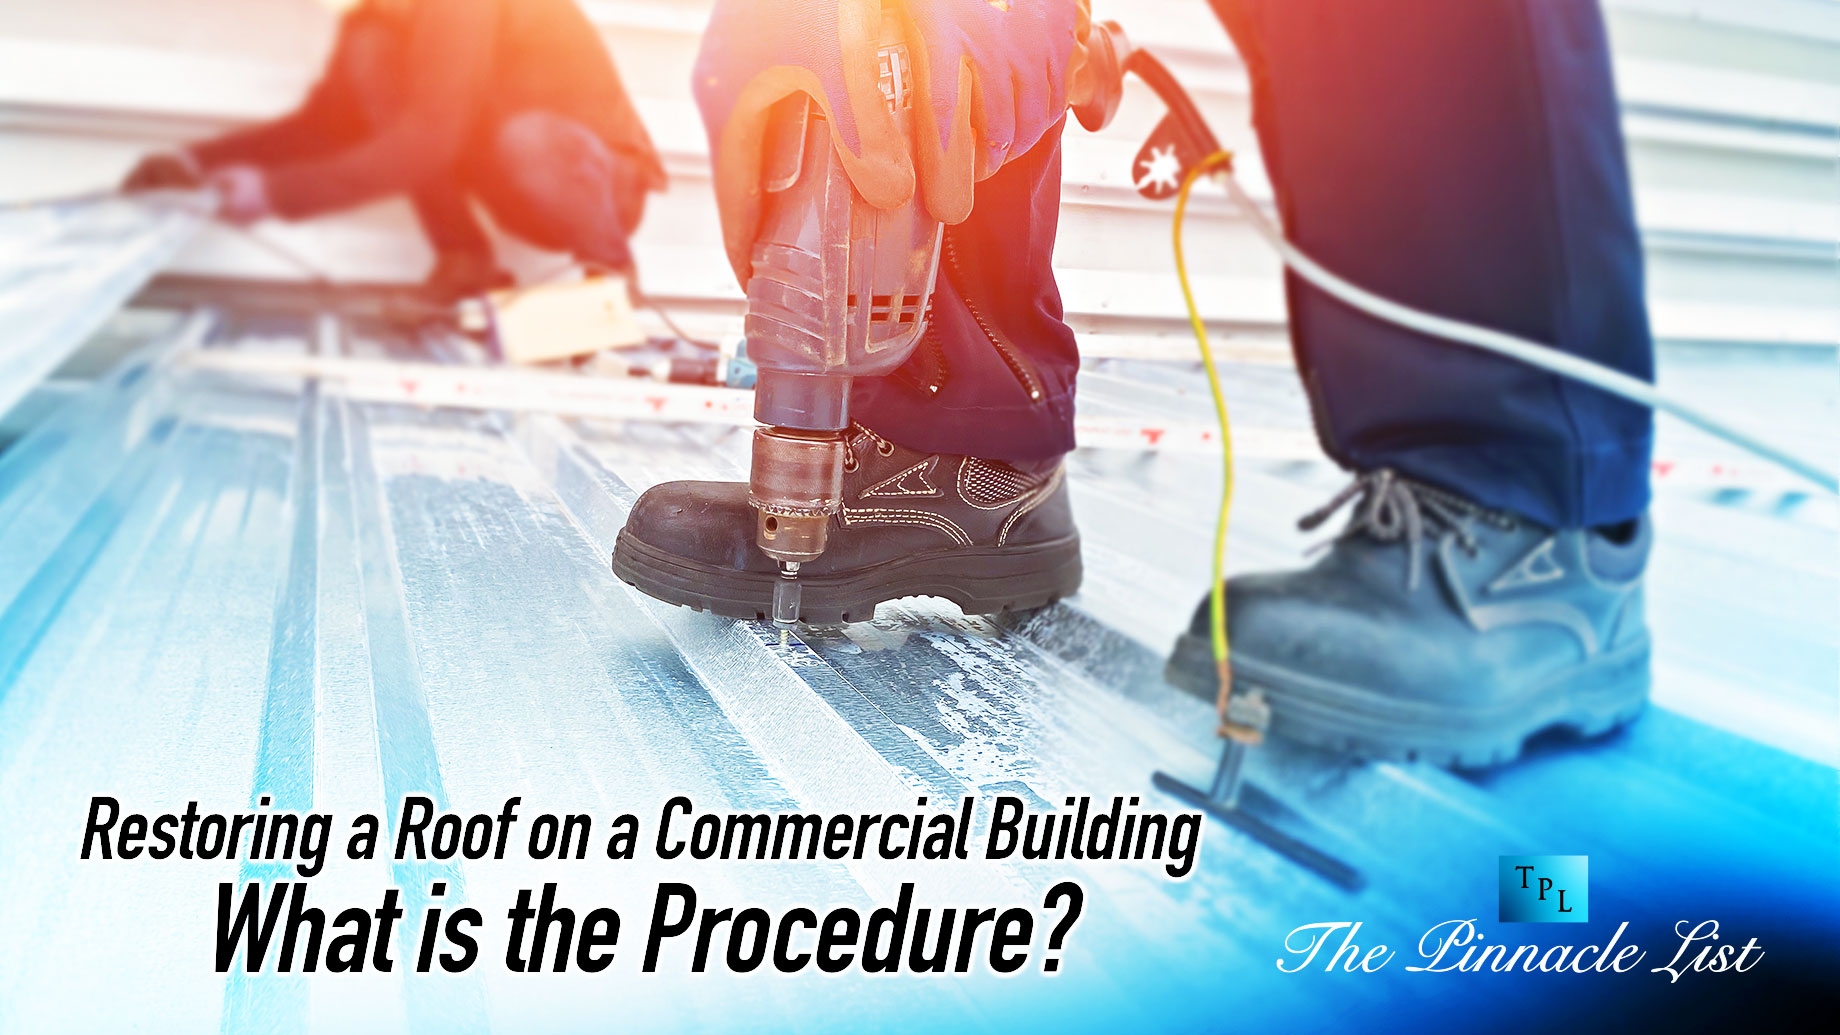 Restoring a Roof on a Commercial Building: What is the Procedure?